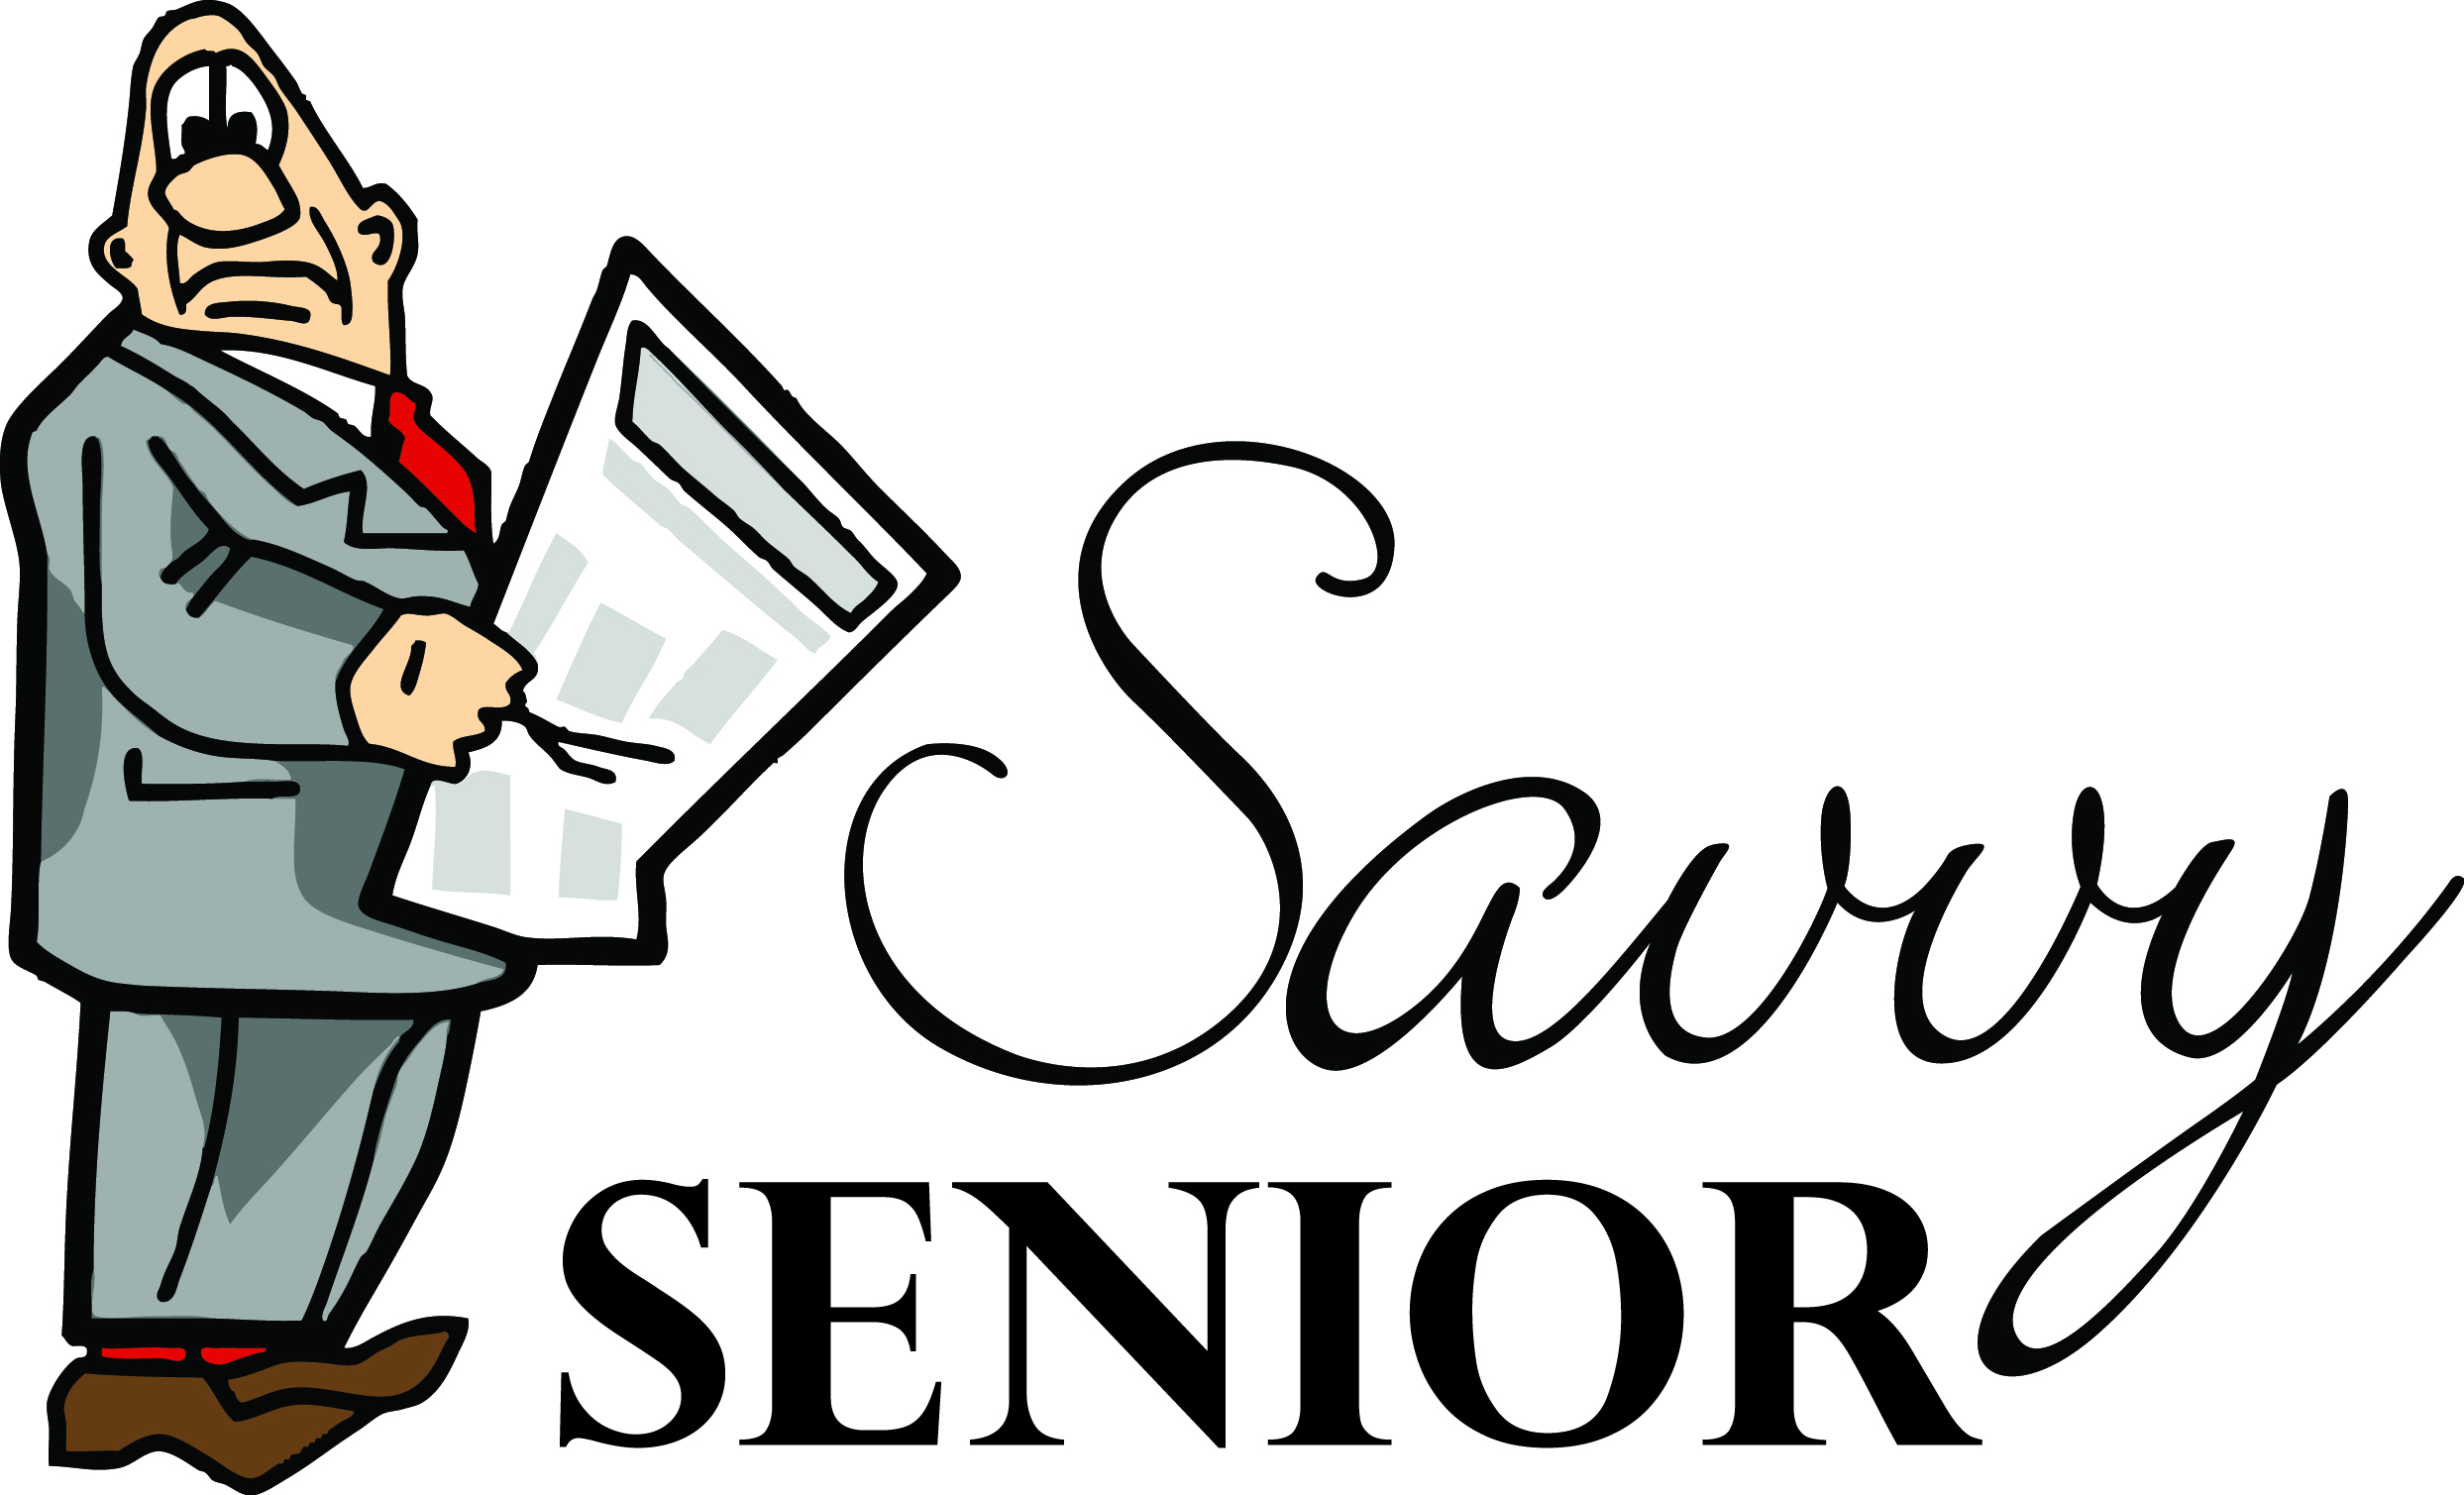 Savvy Senior: Choosing a Senior Community That Offers All Levels of Care